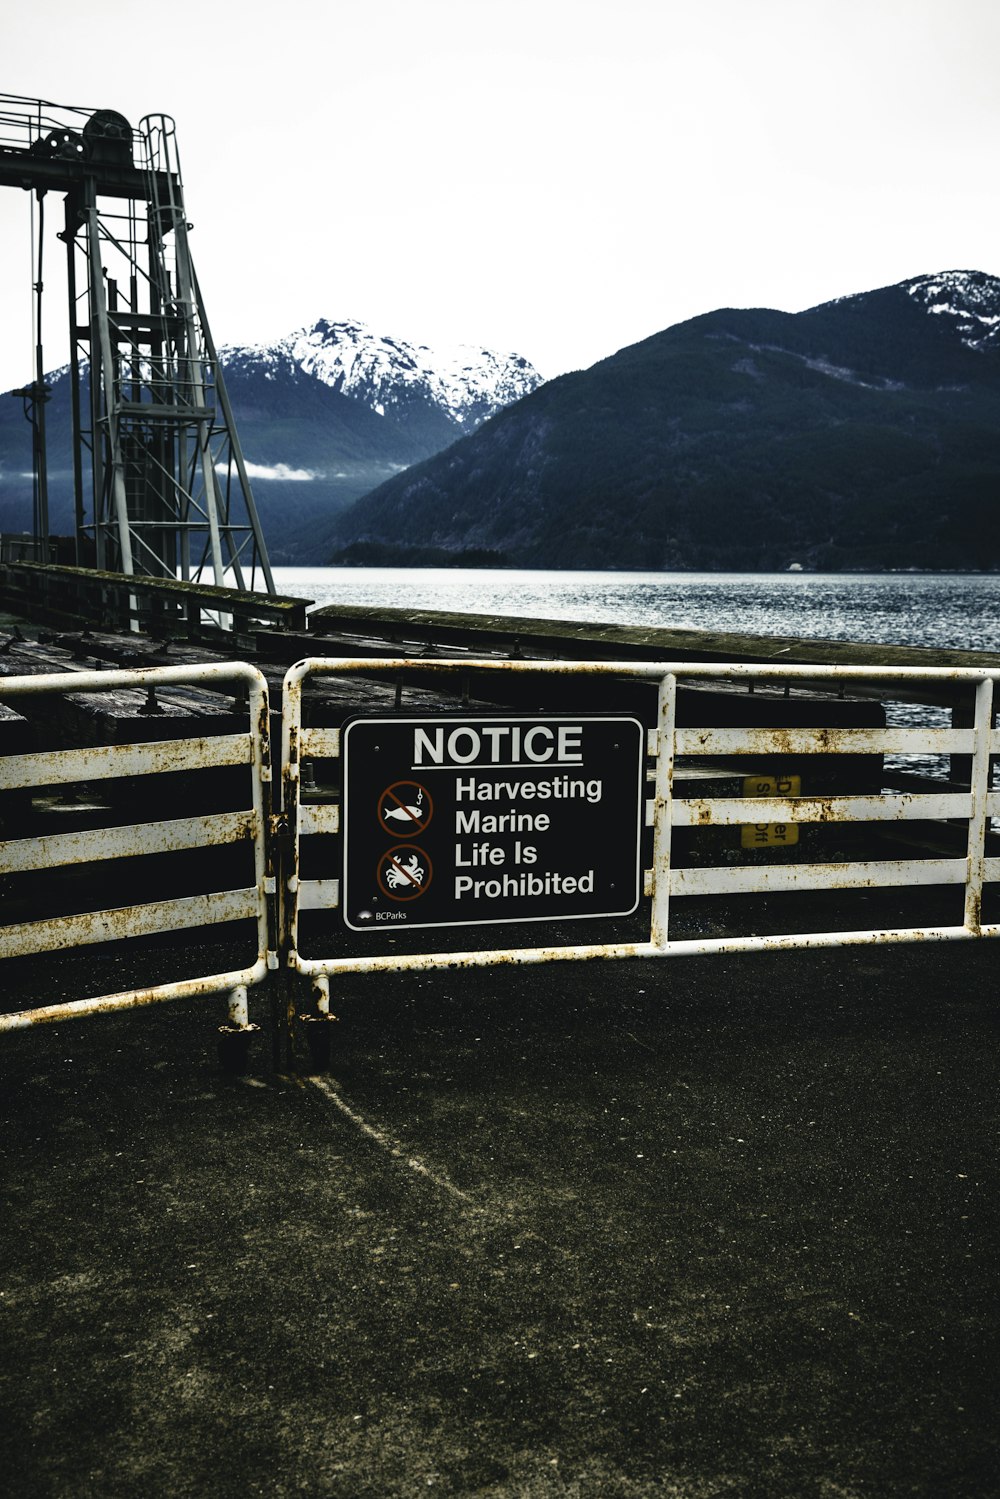 a warning sign on a fence near a body of water